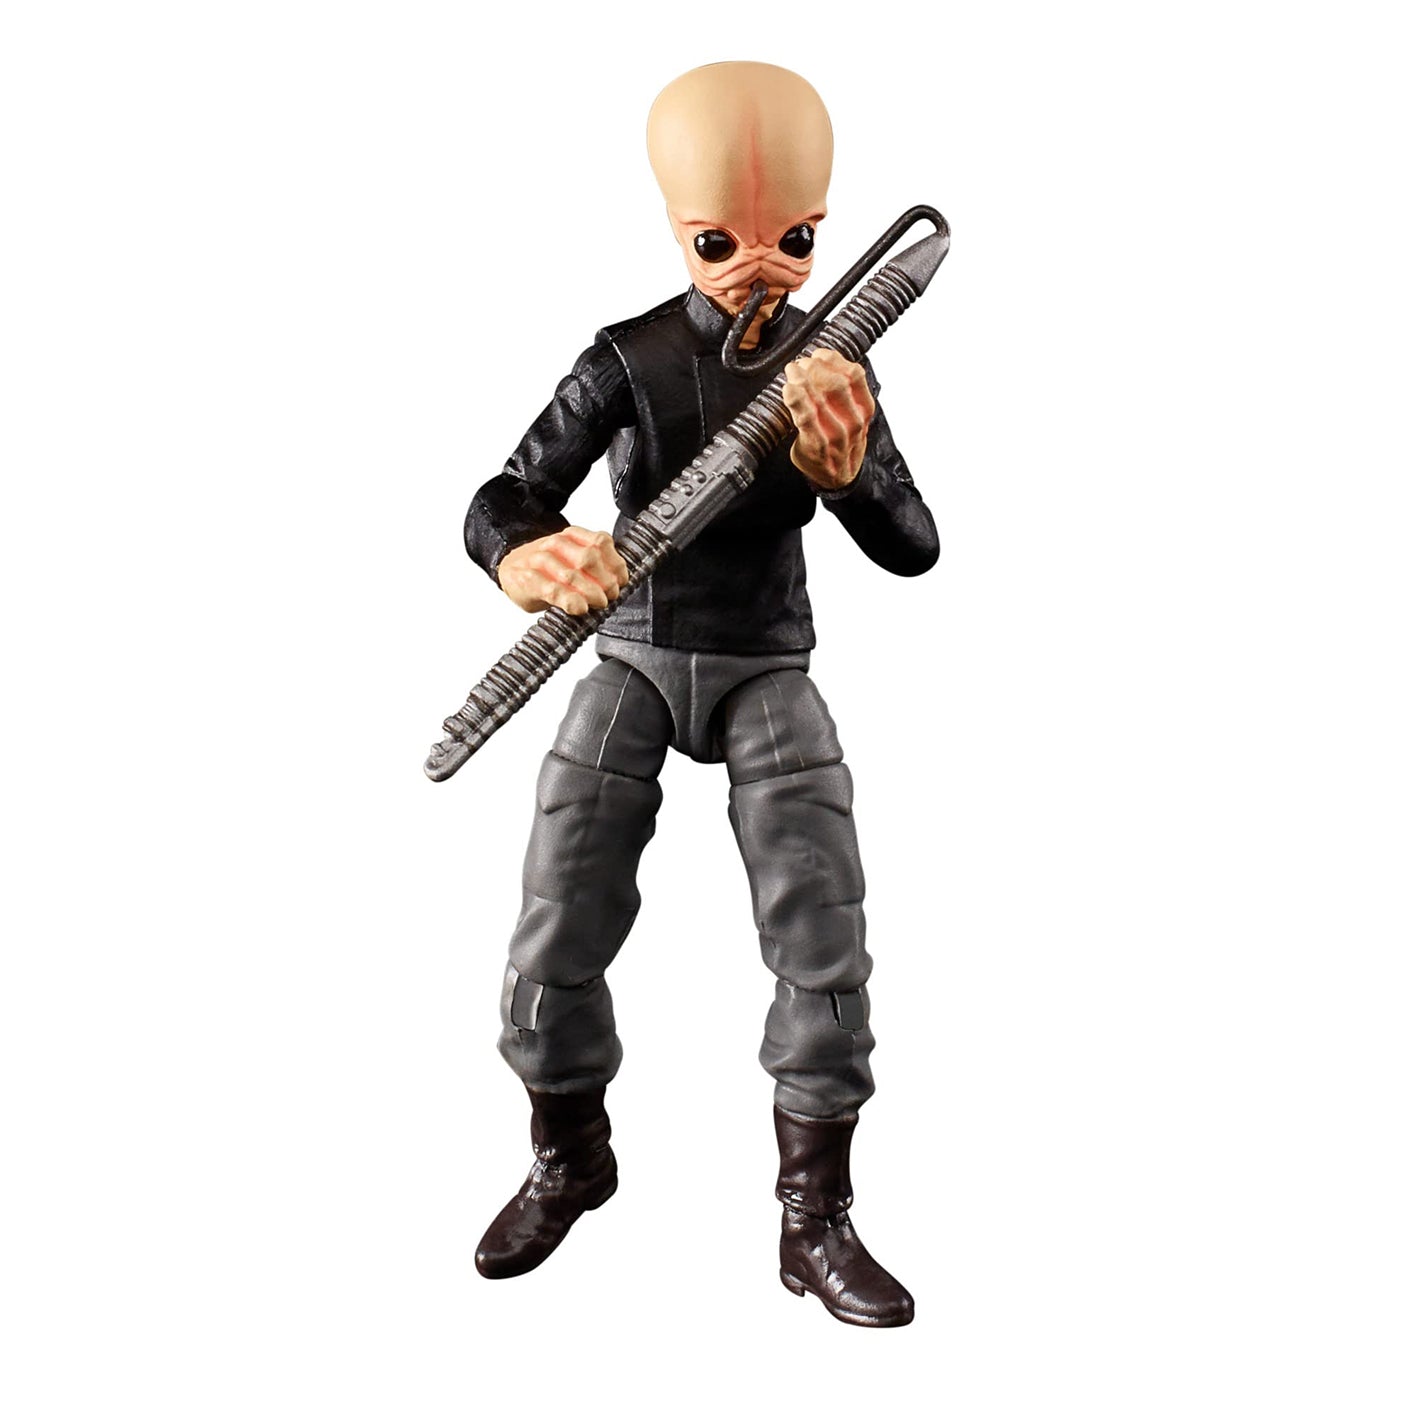 Figrin D'an and the Modal Nodes, Star Wars: The Vintage Collection